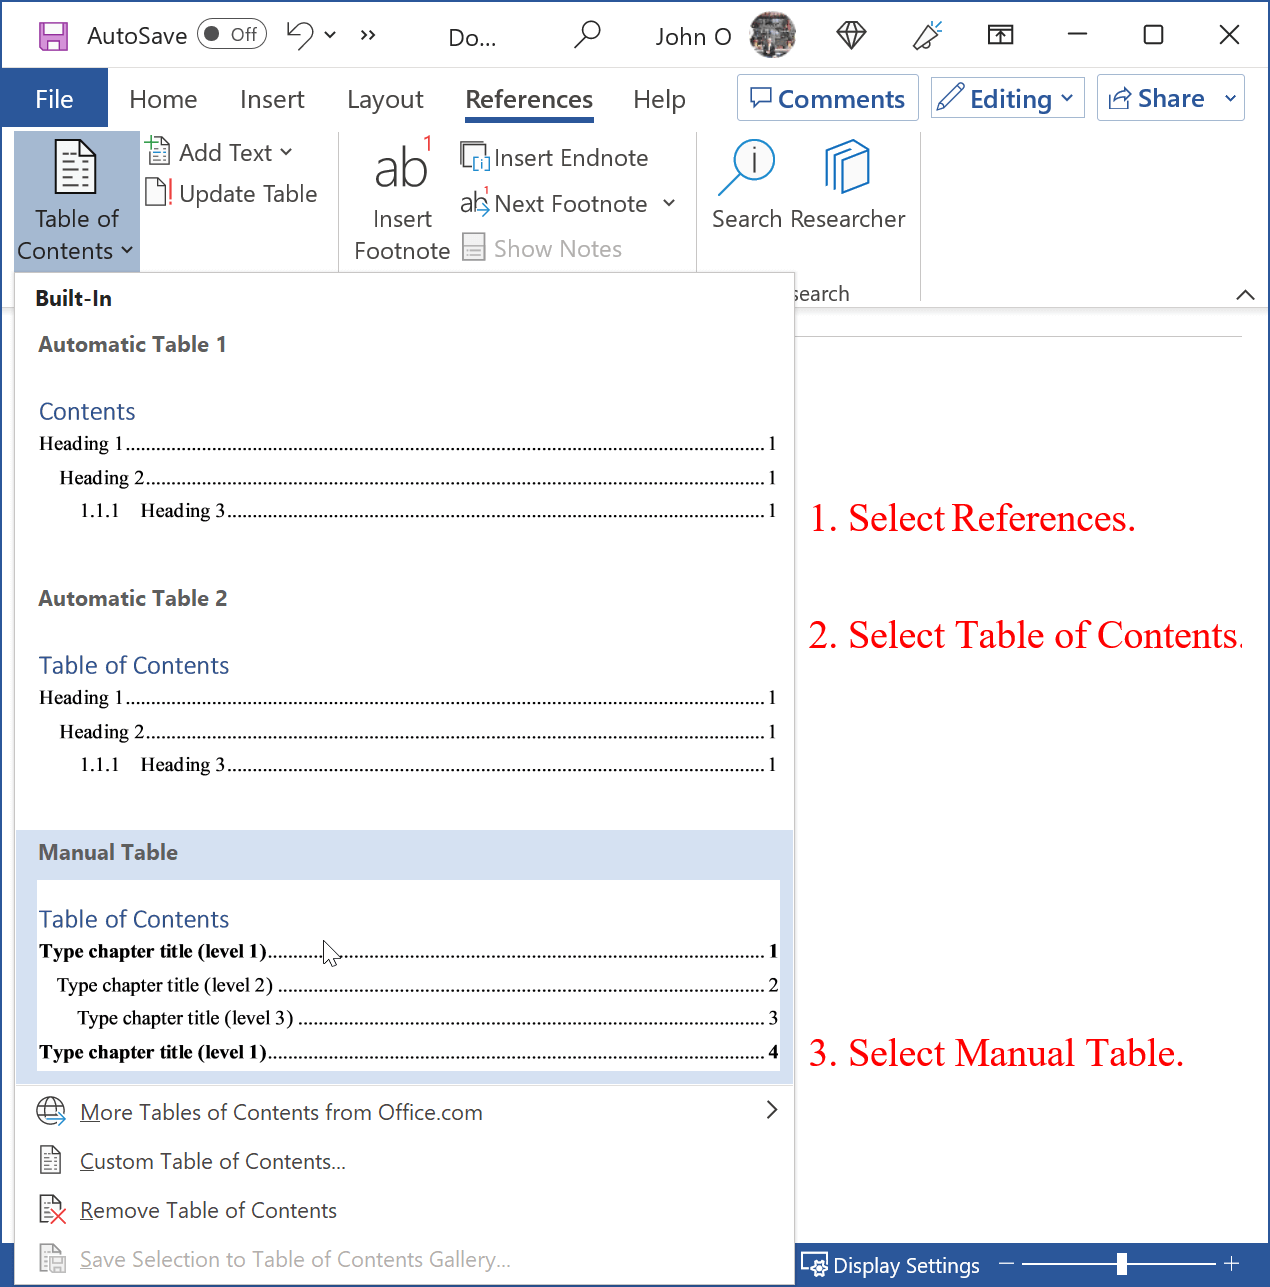 Shows the steps to insert the manual table of contents into a Word document. The steps are (1) Select References (2) Select Table of Contents (3) Select Manual Table.